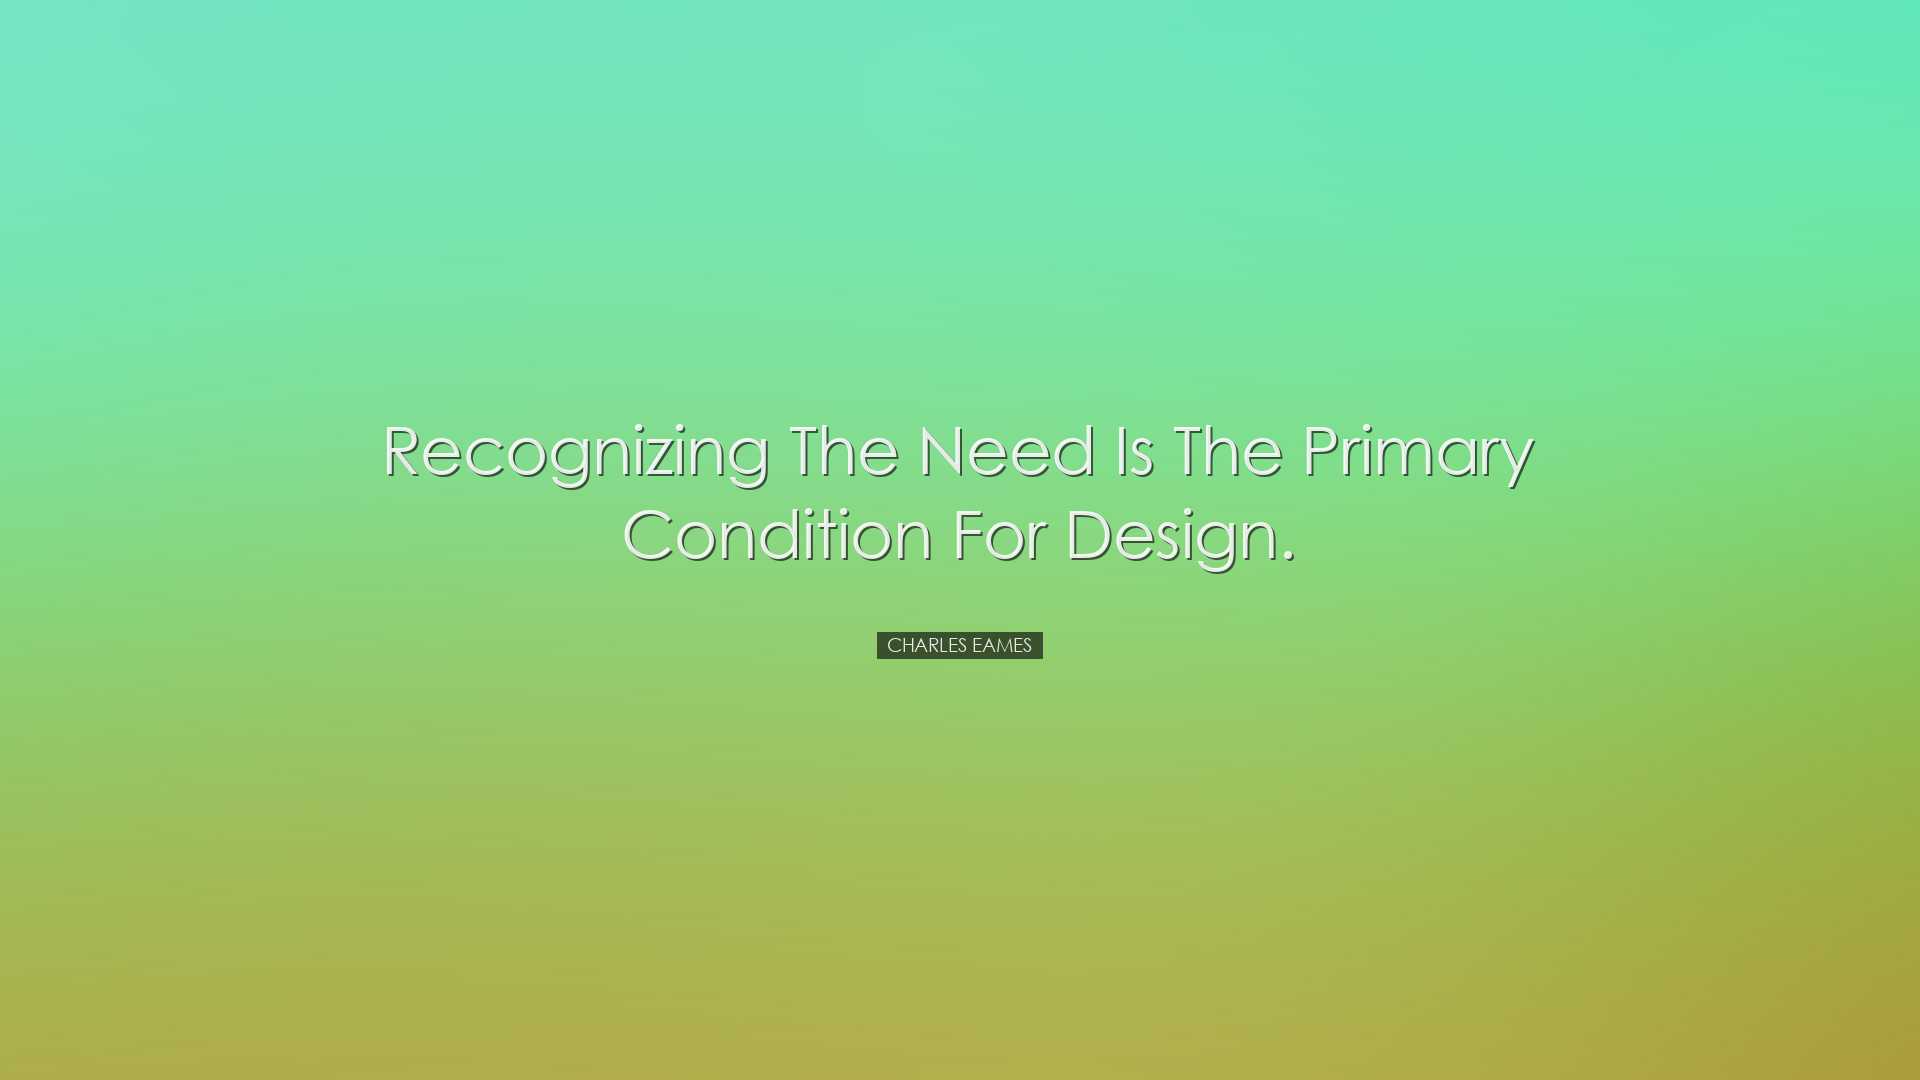 Recognizing the need is the primary condition for design. - Charle